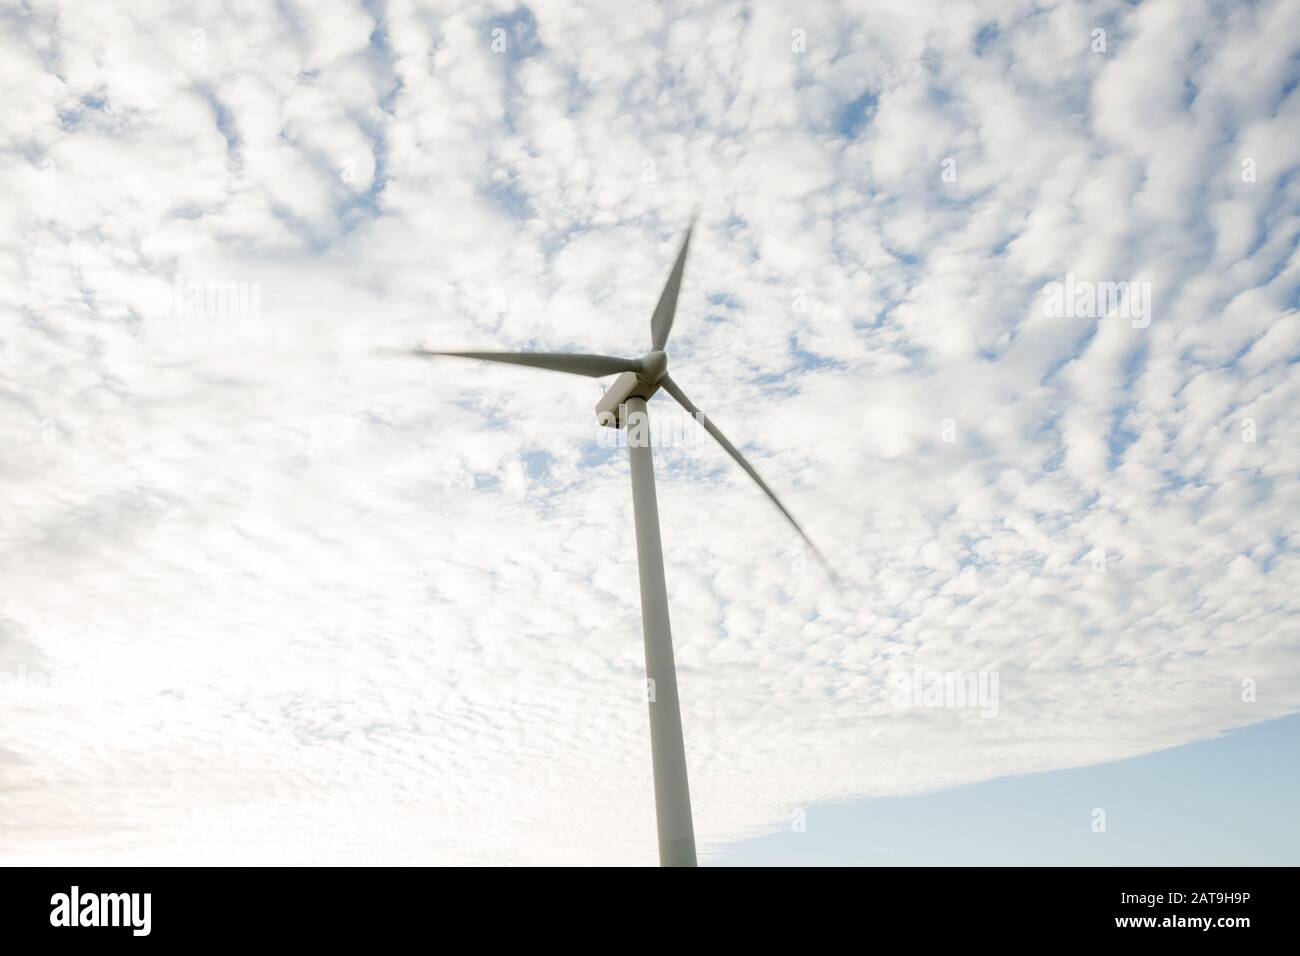 wind turbine used for renewable energy production with motion blur and clouds behind, located in Toora Victoria Australia Stock Photo